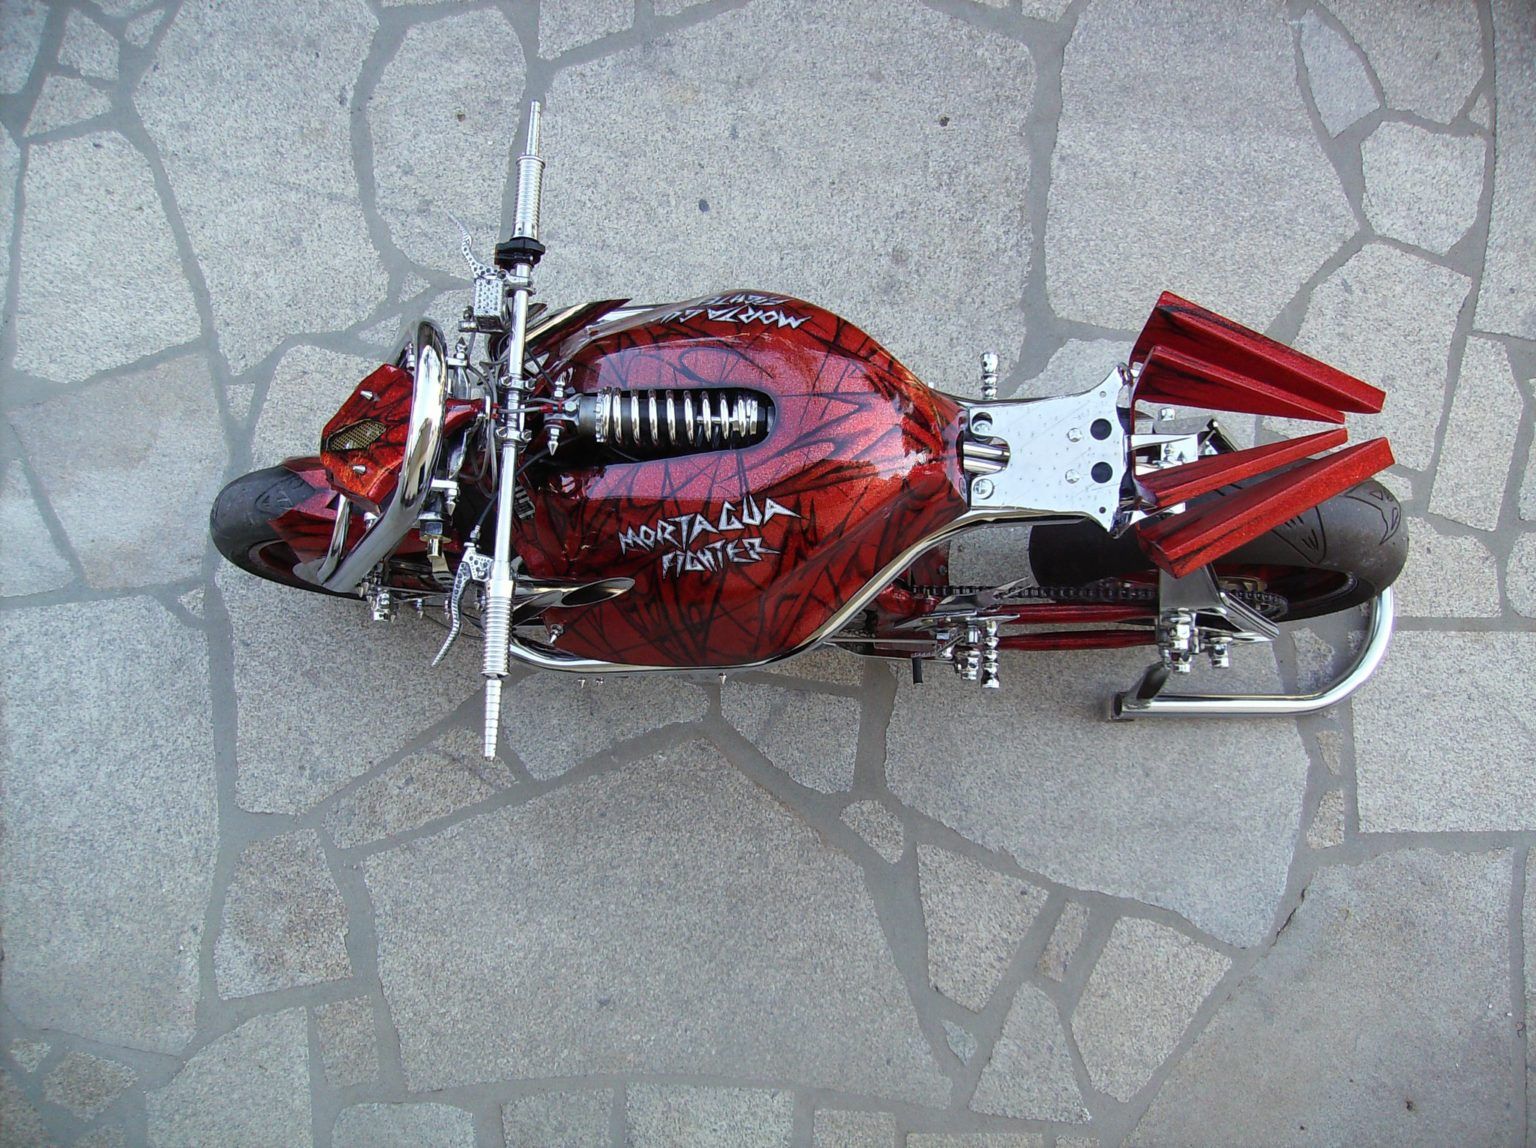 Are These The Wildest Custom Bikes Youve Never Heard Of